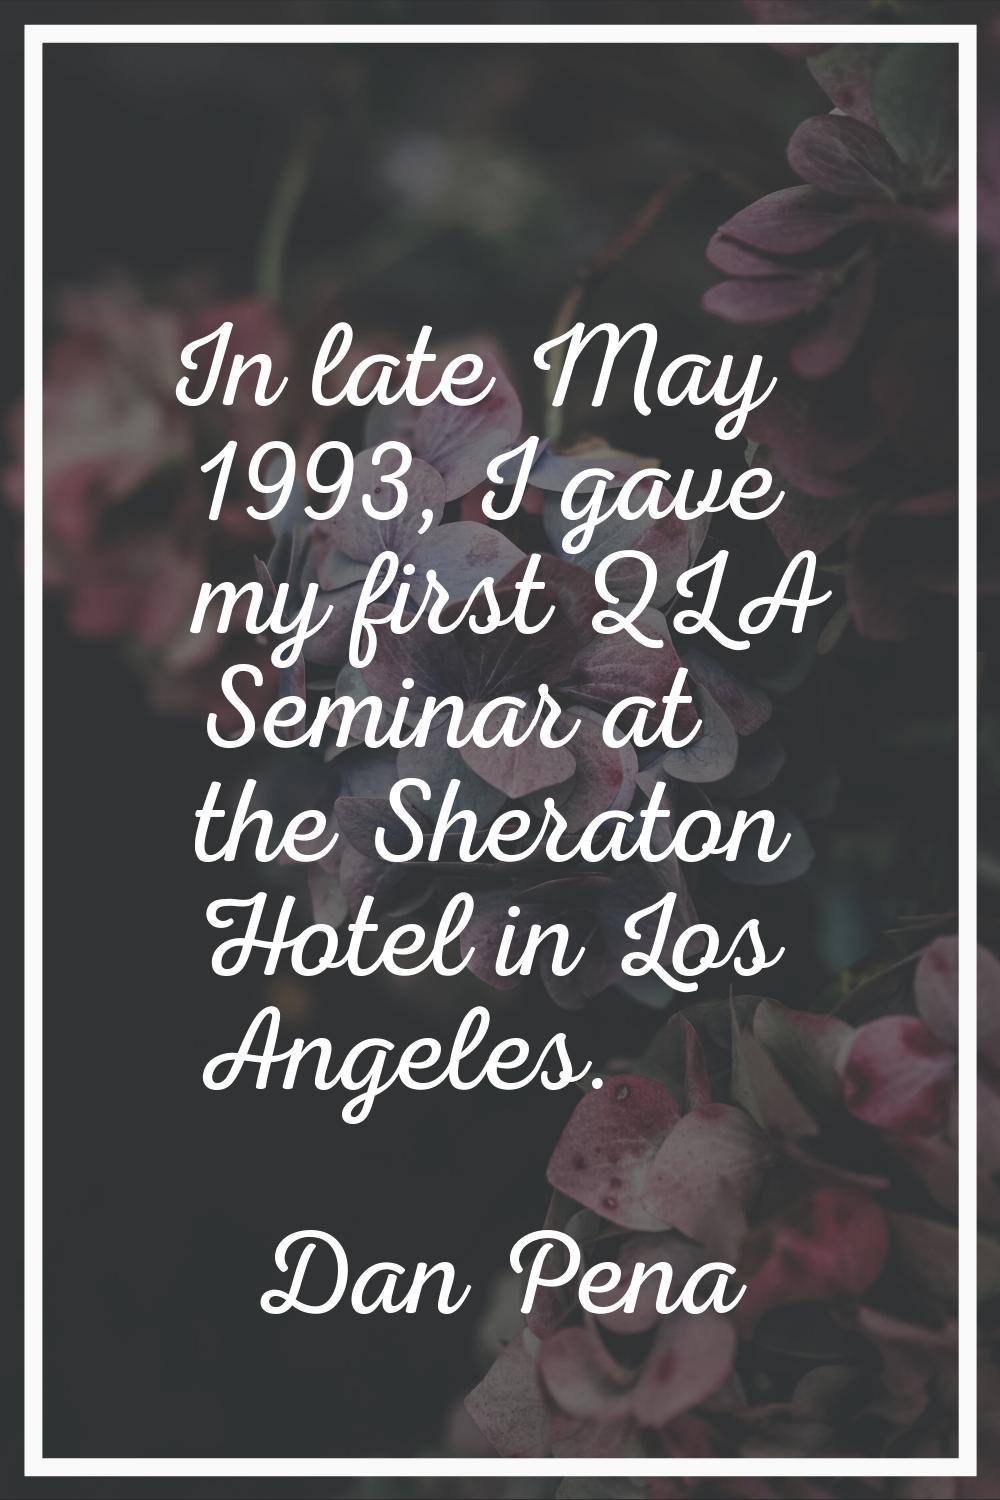 In late May 1993, I gave my first QLA Seminar at the Sheraton Hotel in Los Angeles.